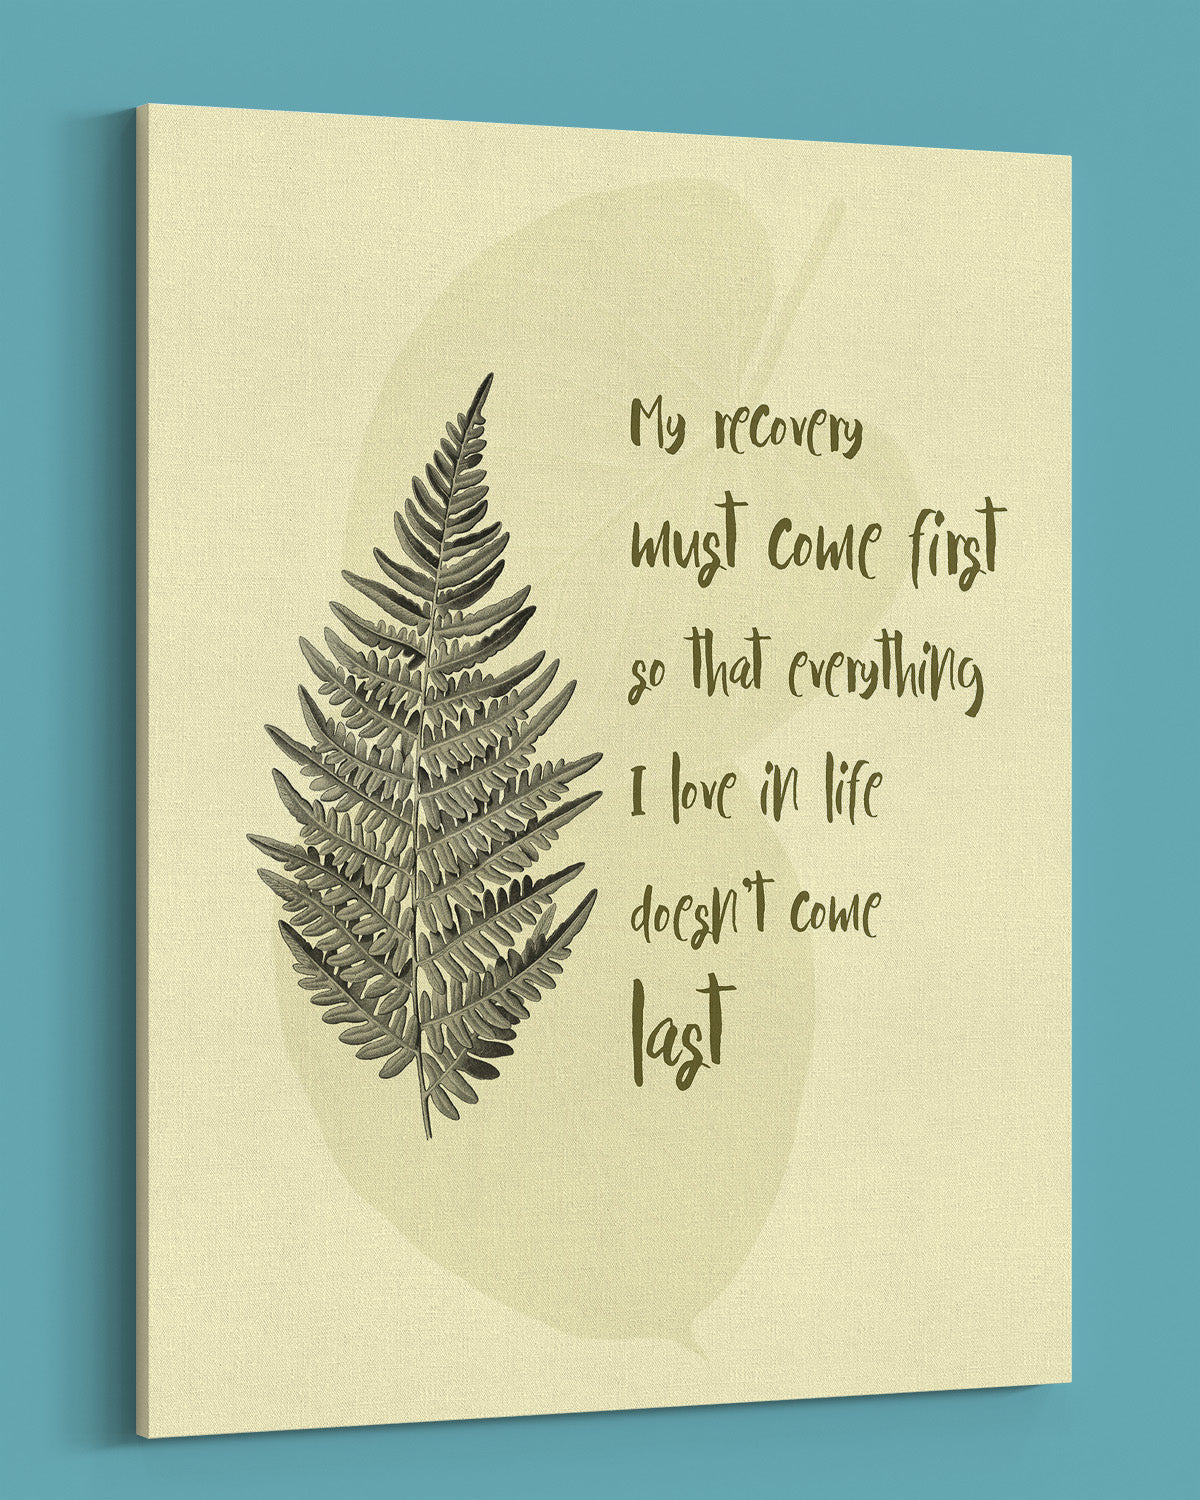 Recovery Quote Canvas - Addiction Recovery Wall Art Decor  - Sobriety Anniversary - unframed artwork printed on canvas